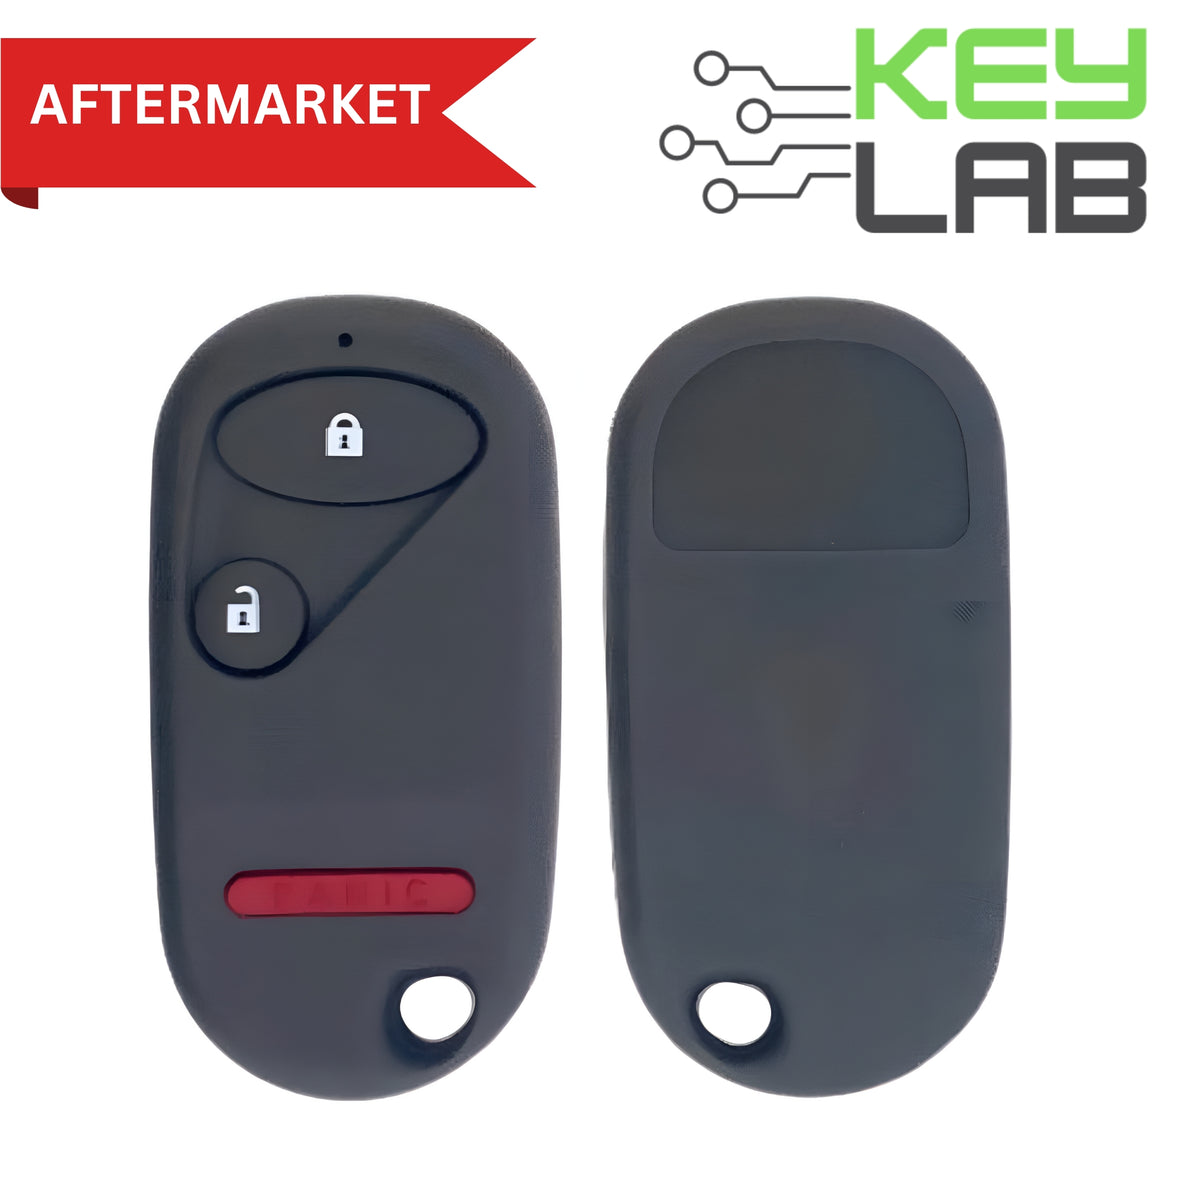 Honda Aftermarket 2002-2011 Element, Civic Keyless Entry Remote 3B FCCID: OUCG8D-344H-A PN# 72147-S5T-A01 - Royal Key Supply